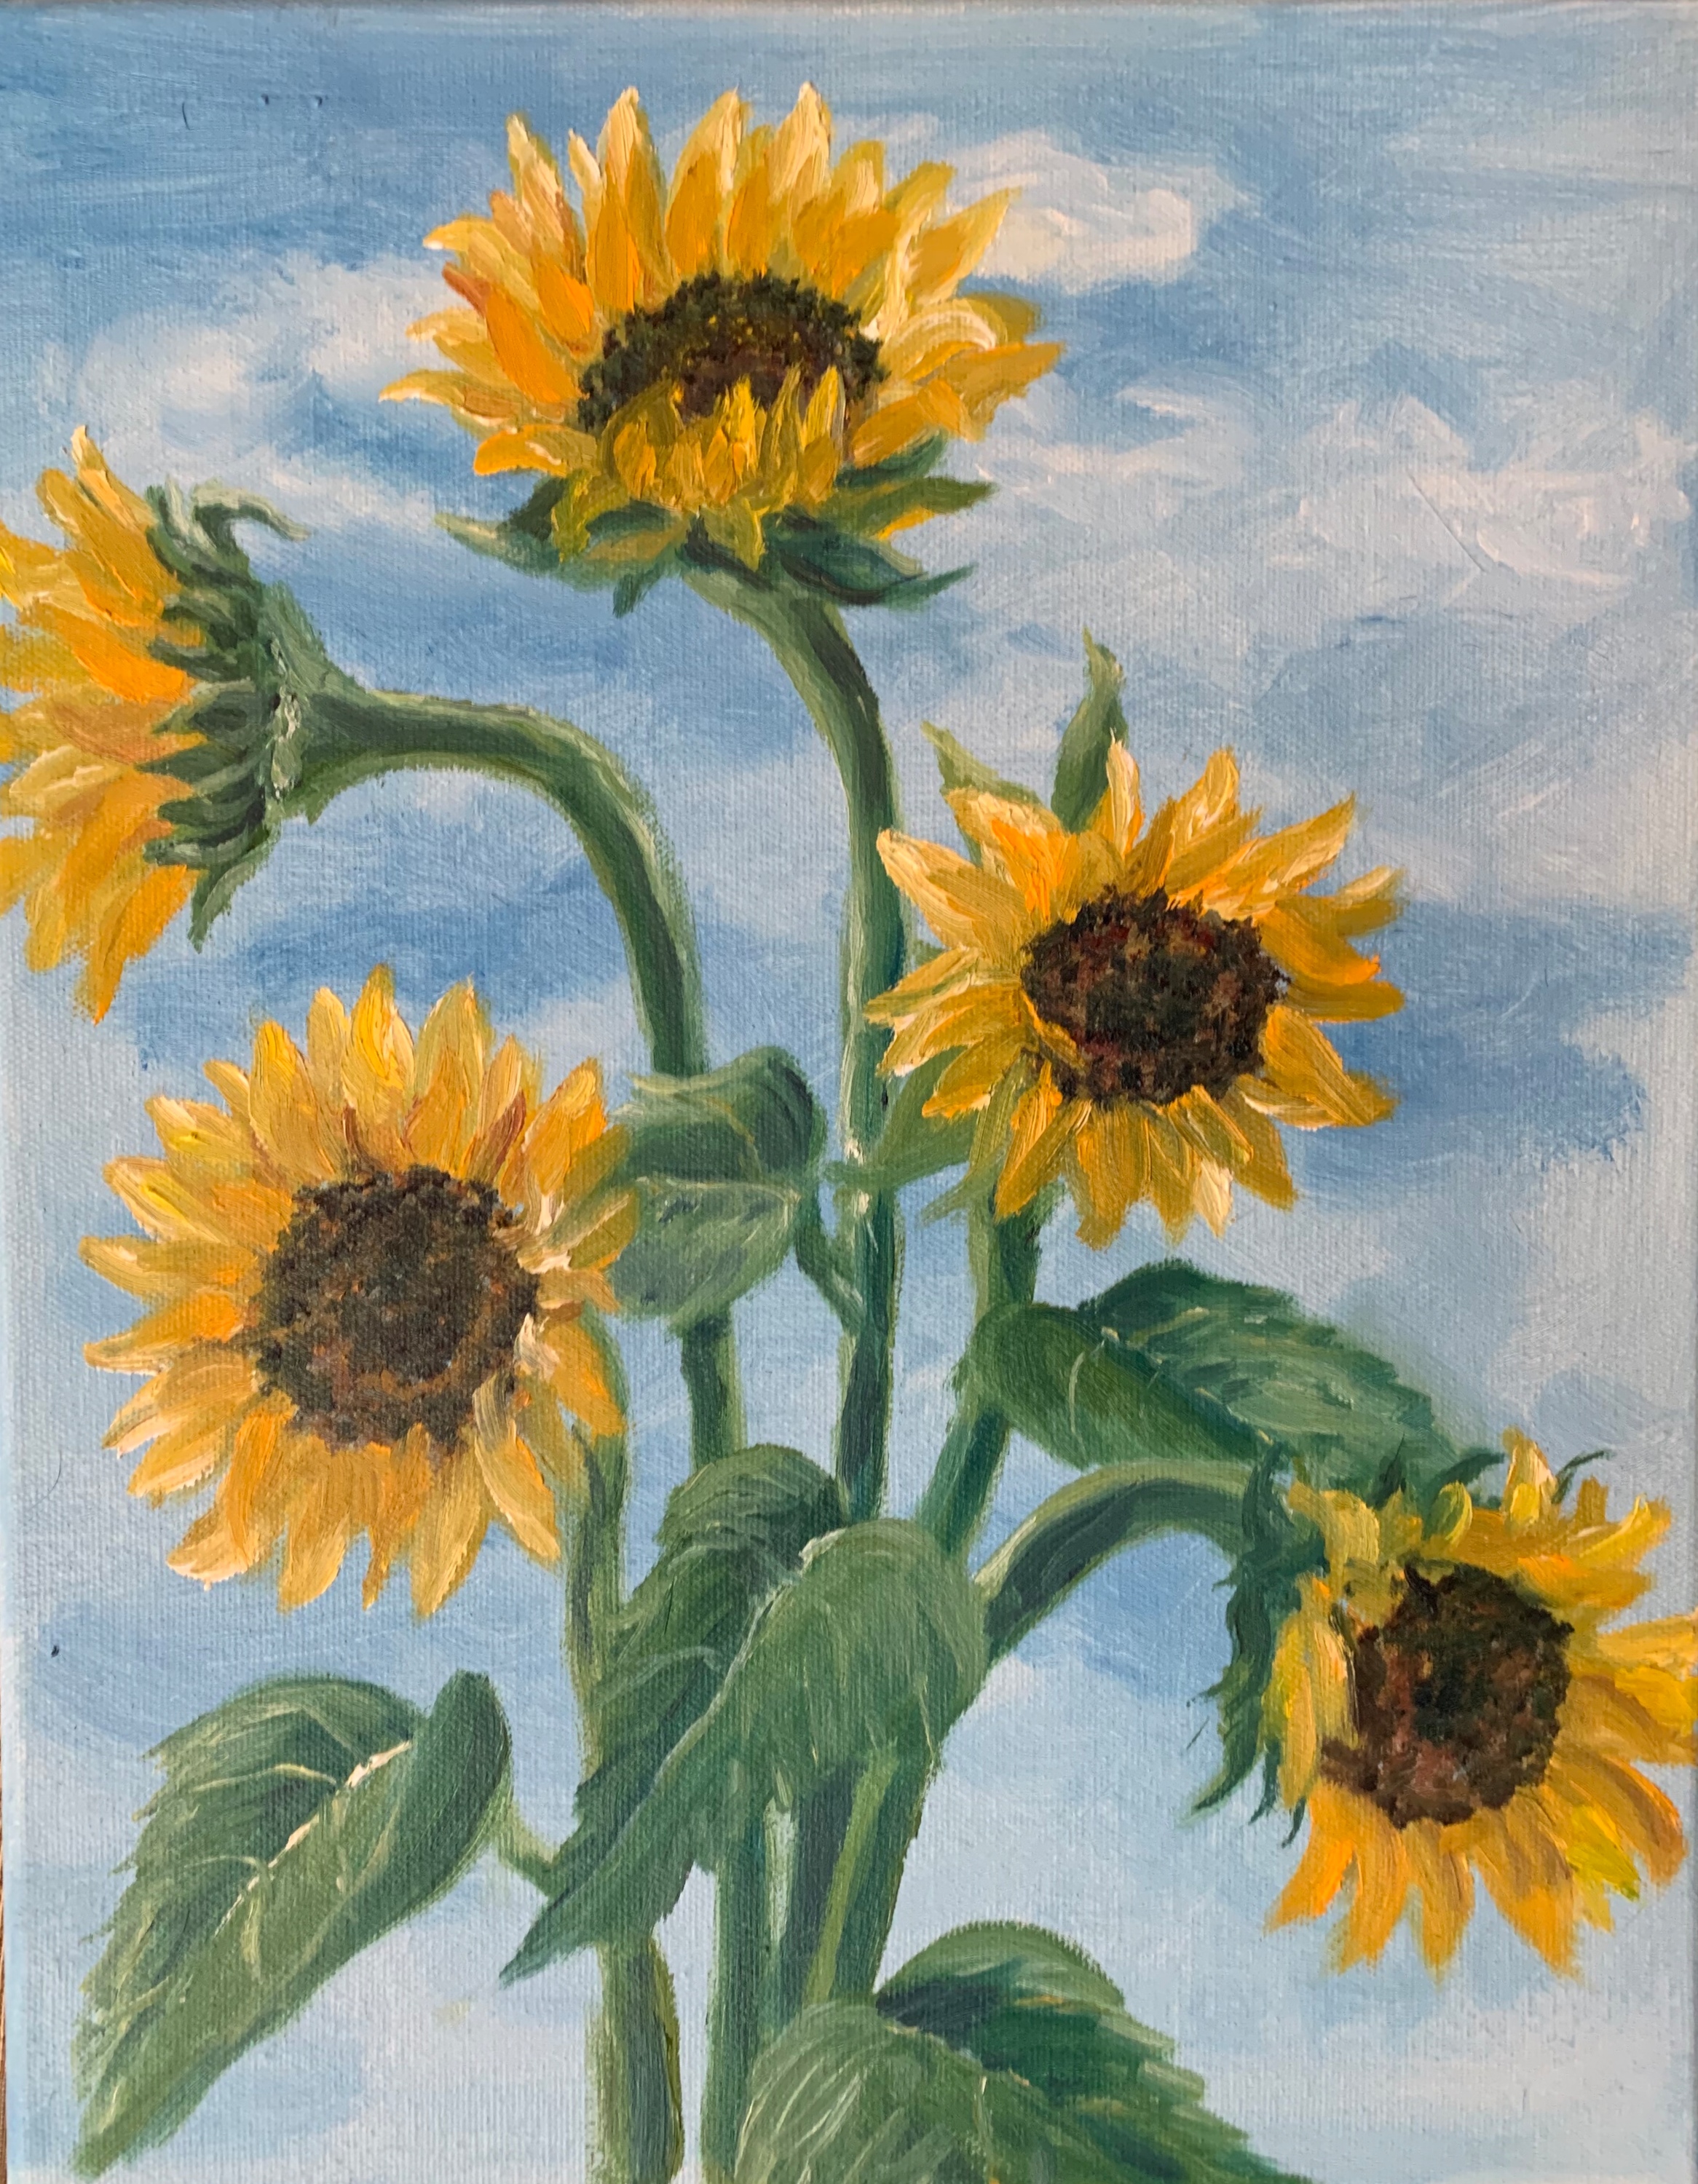 Cathy poulos   2021 10 19 16.36.10   happy sunflowers fgcd9s